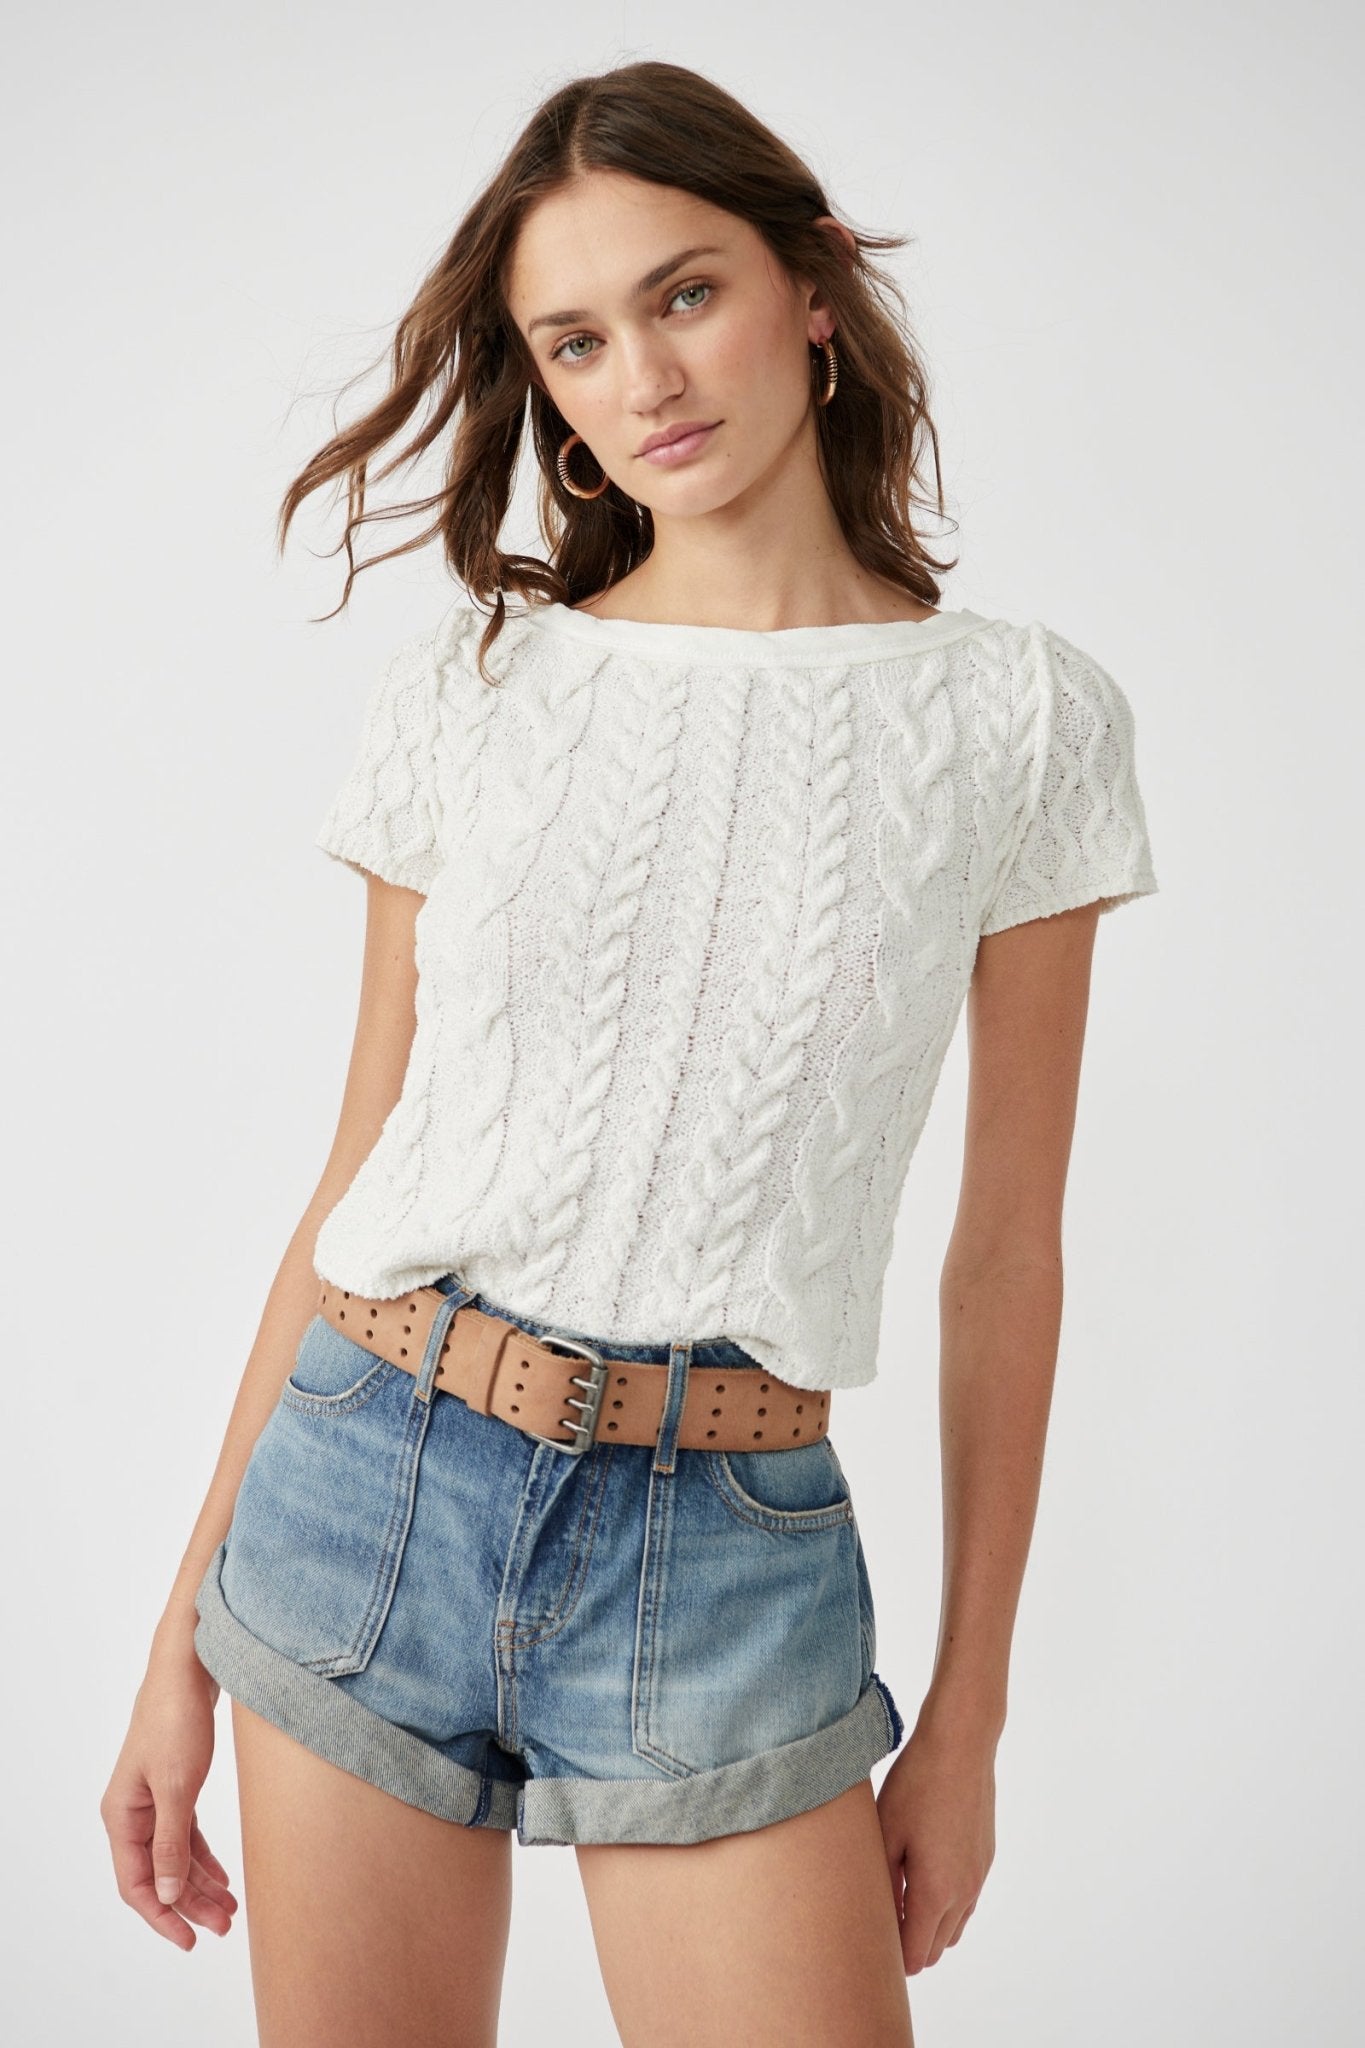 Free People Mix It Up Baby Crop Top - Short Sleeve - Save 56%